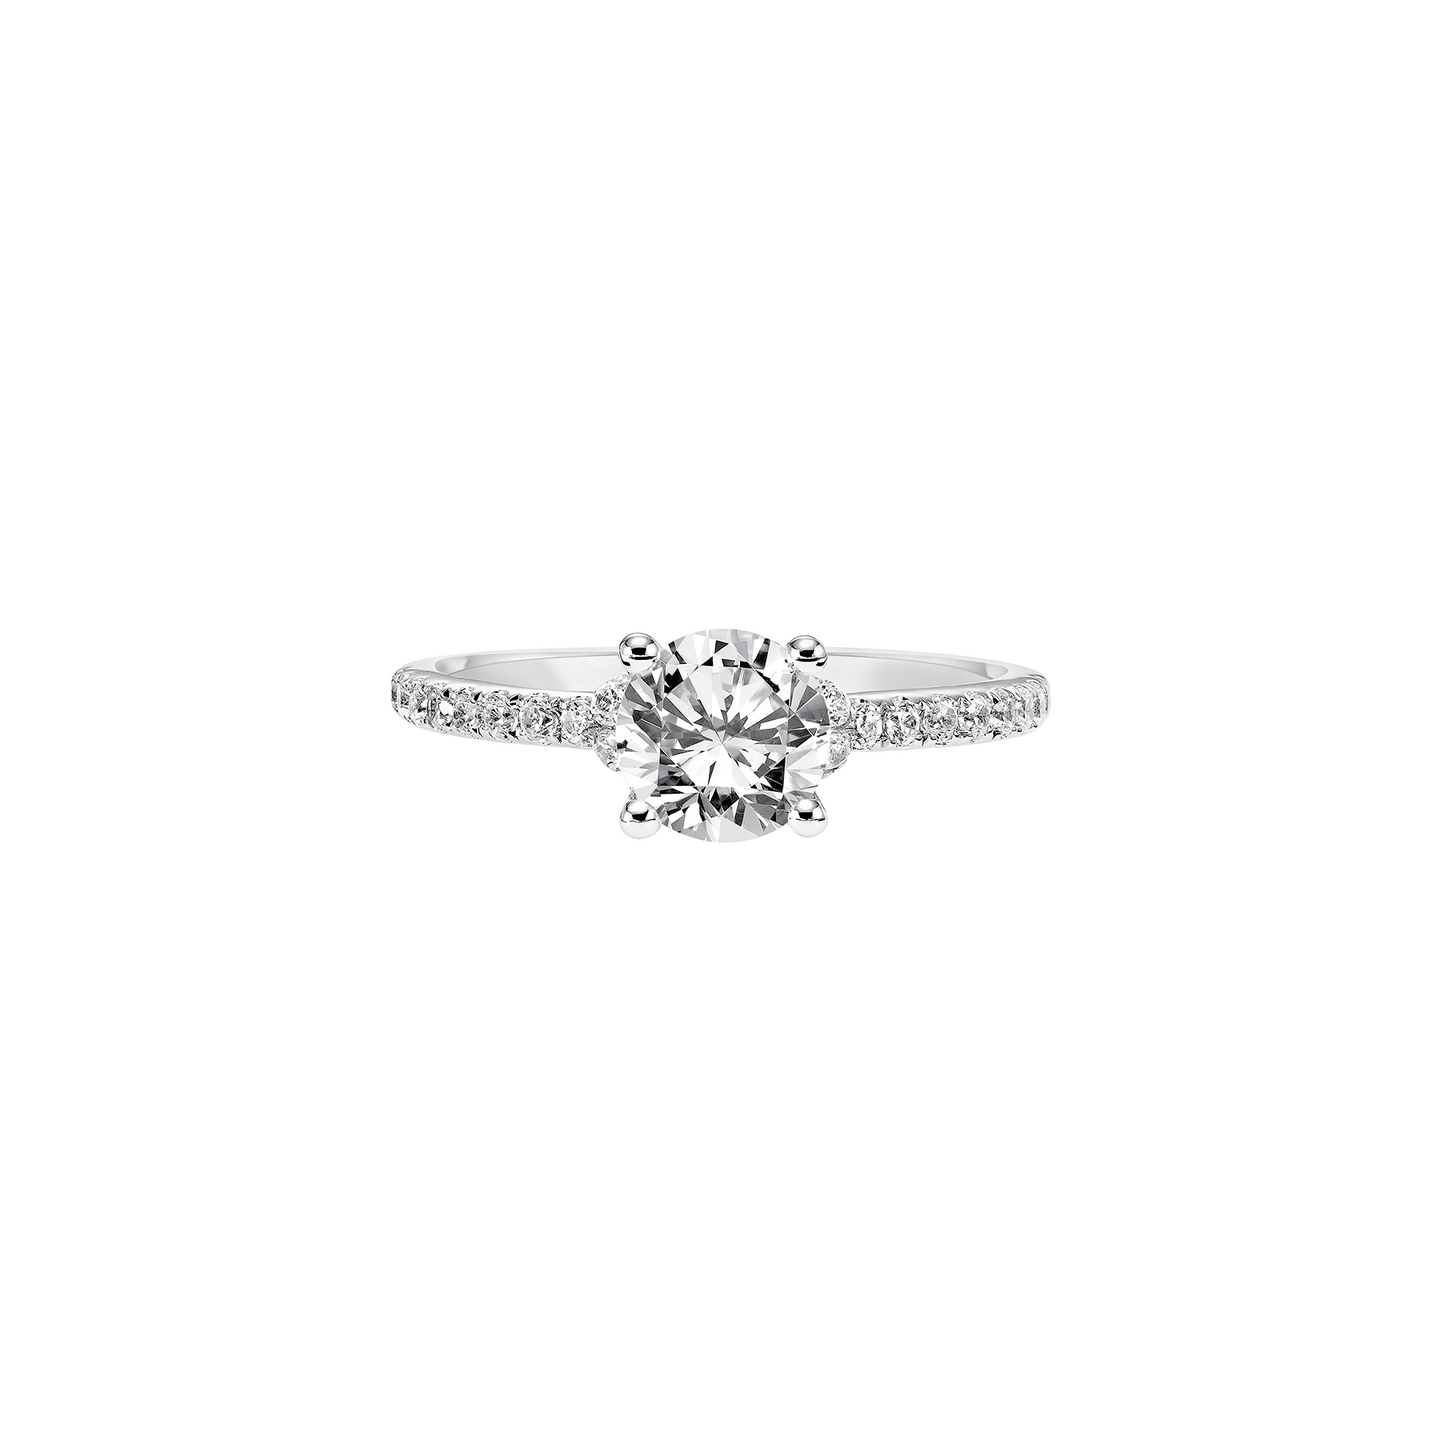 Fink's Exclusive 14K White Gold Round Diamond and Diamond Shank Engagement Ring